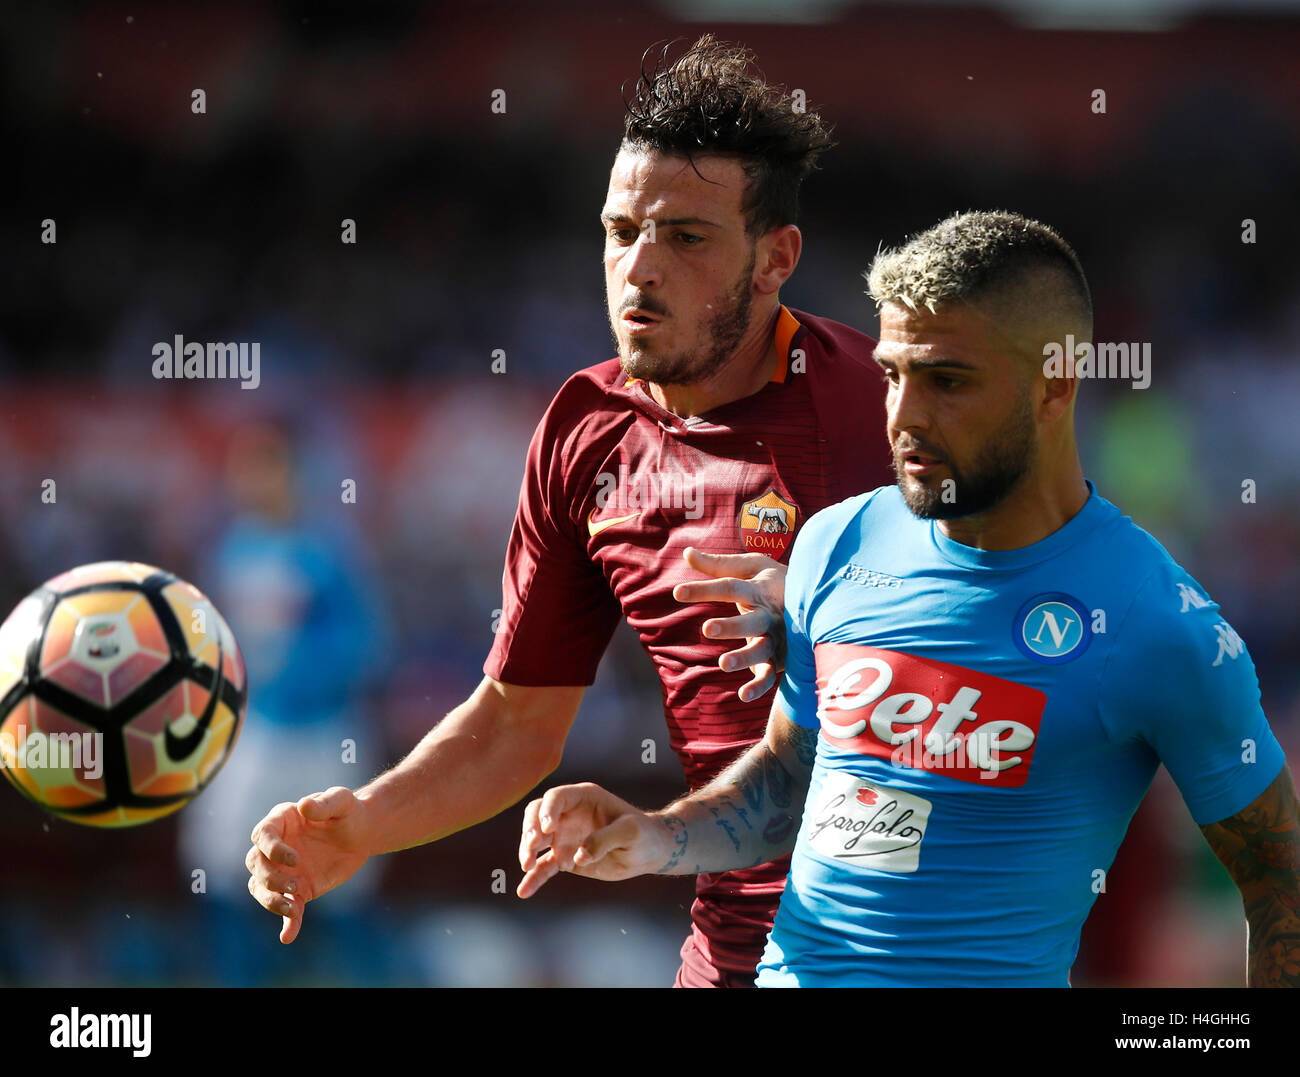 Page 3 - Insigne Roma High Resolution Stock Photography and Images - Alamy